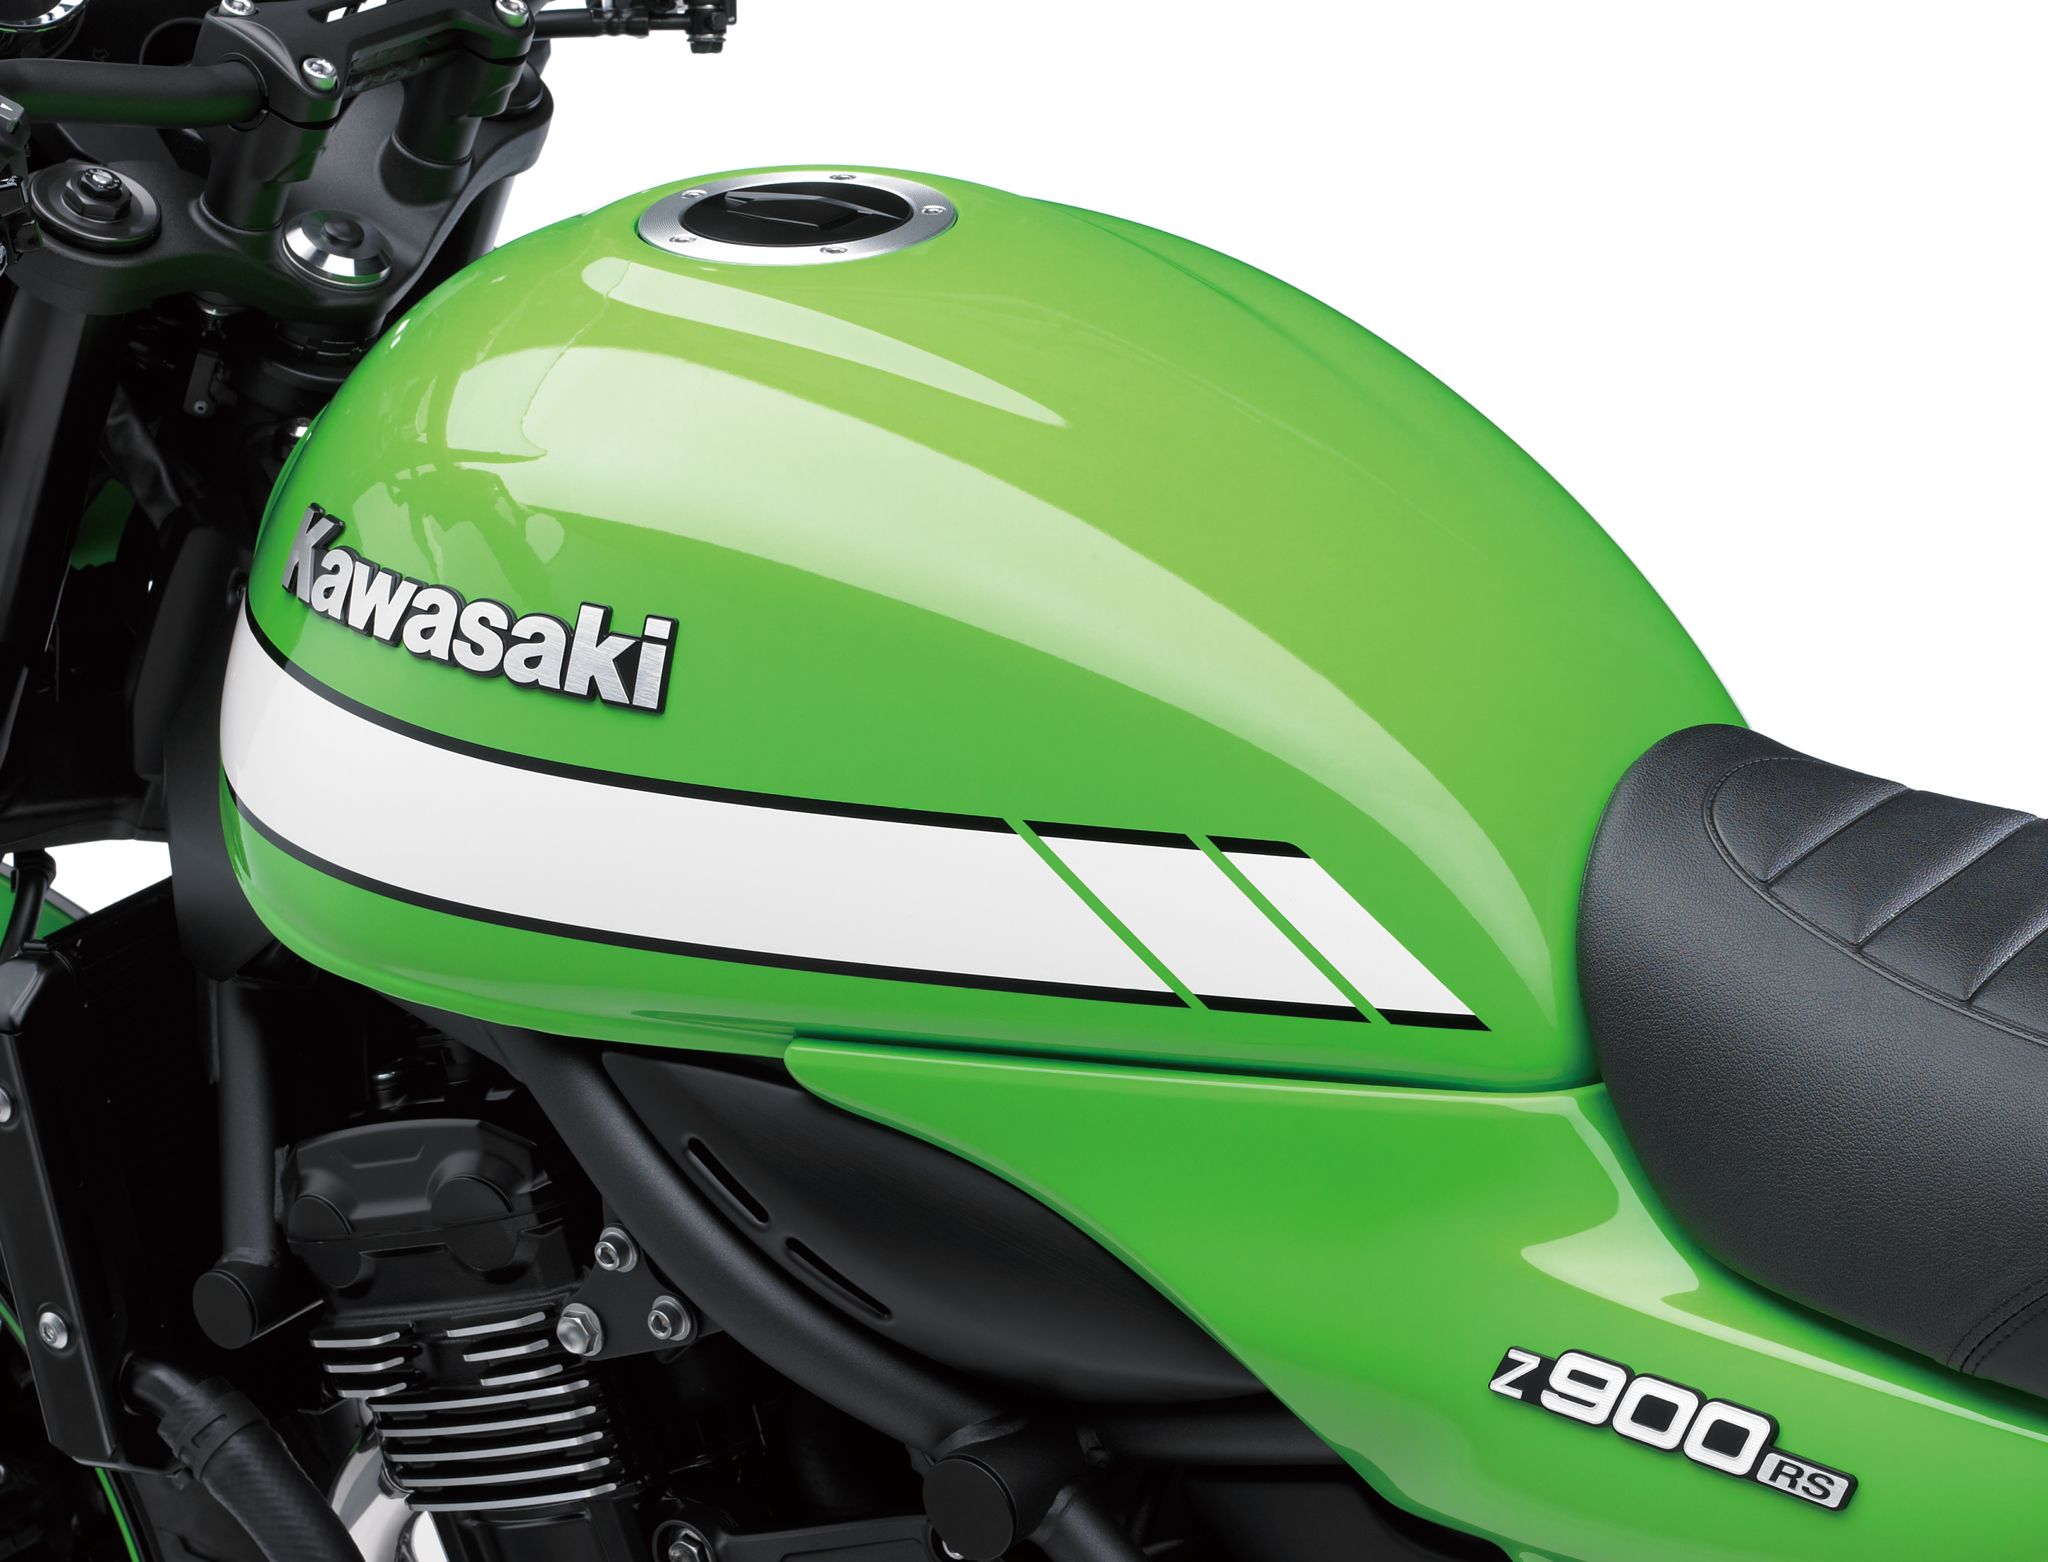 The classy tear drop fuel tank detailed and sexy for the new Z900RS from Kawasaki